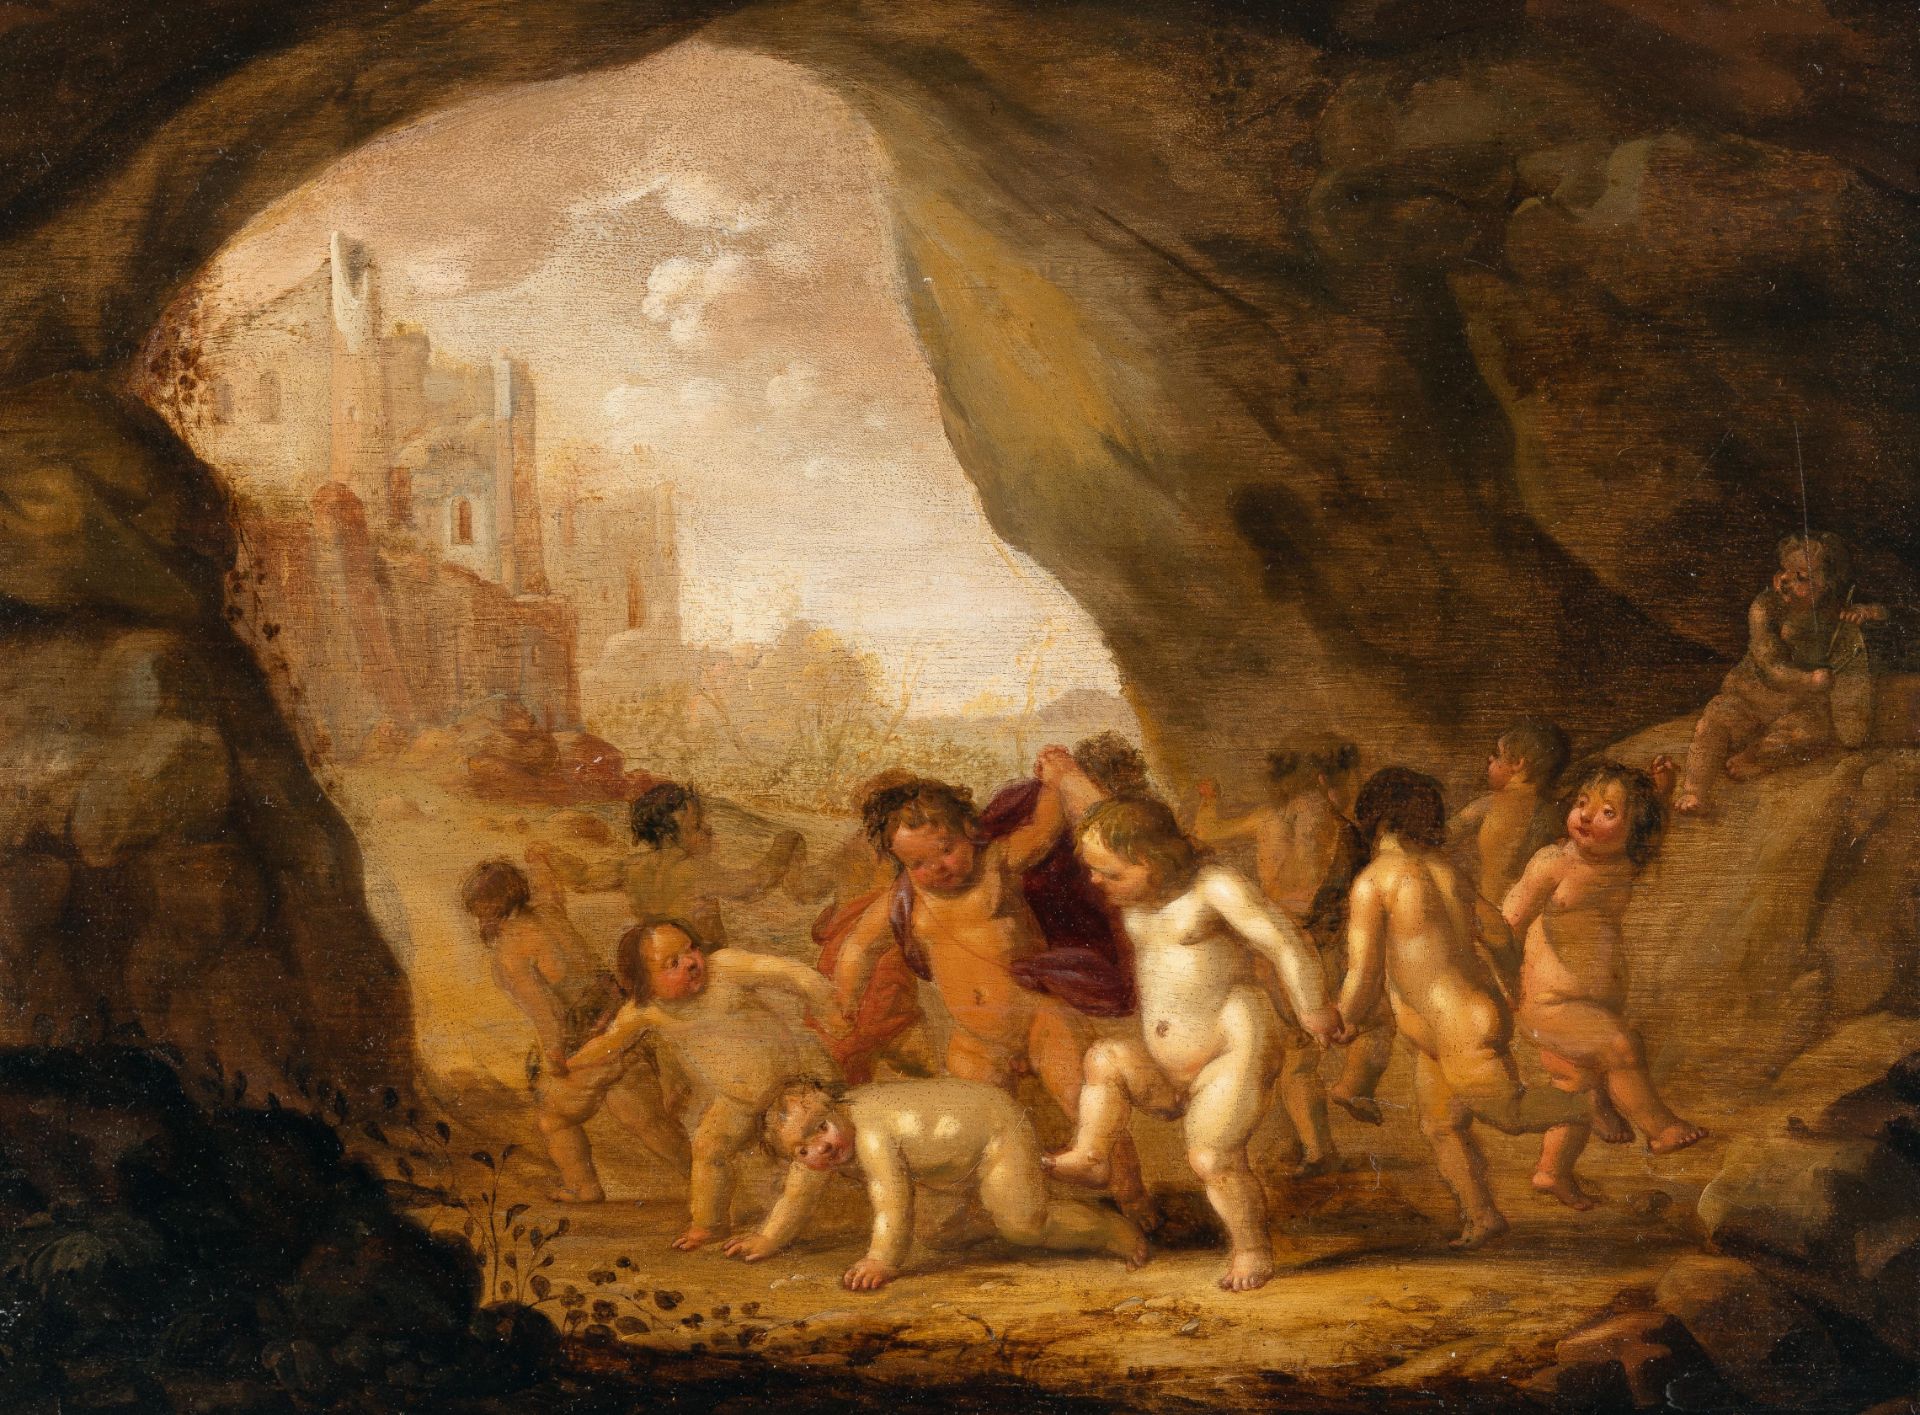 Abraham van Cuylenborch (1620 - Utrecht - 1658) – Putti doing a roundeley in a grotto.Oil on oak,